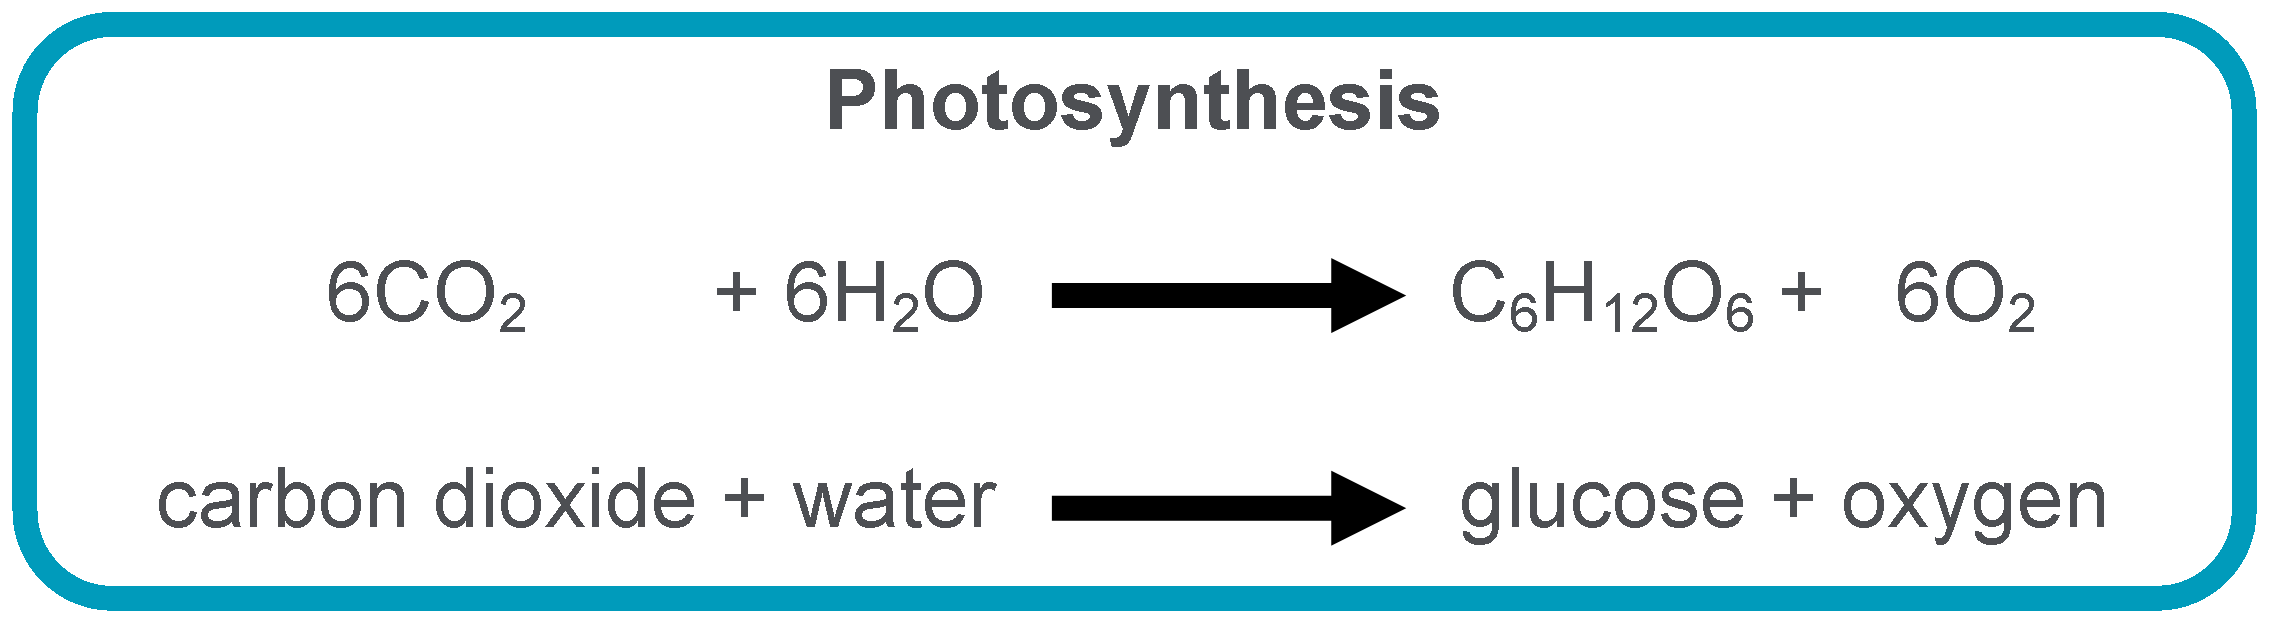 chemical formula for photosynthesis